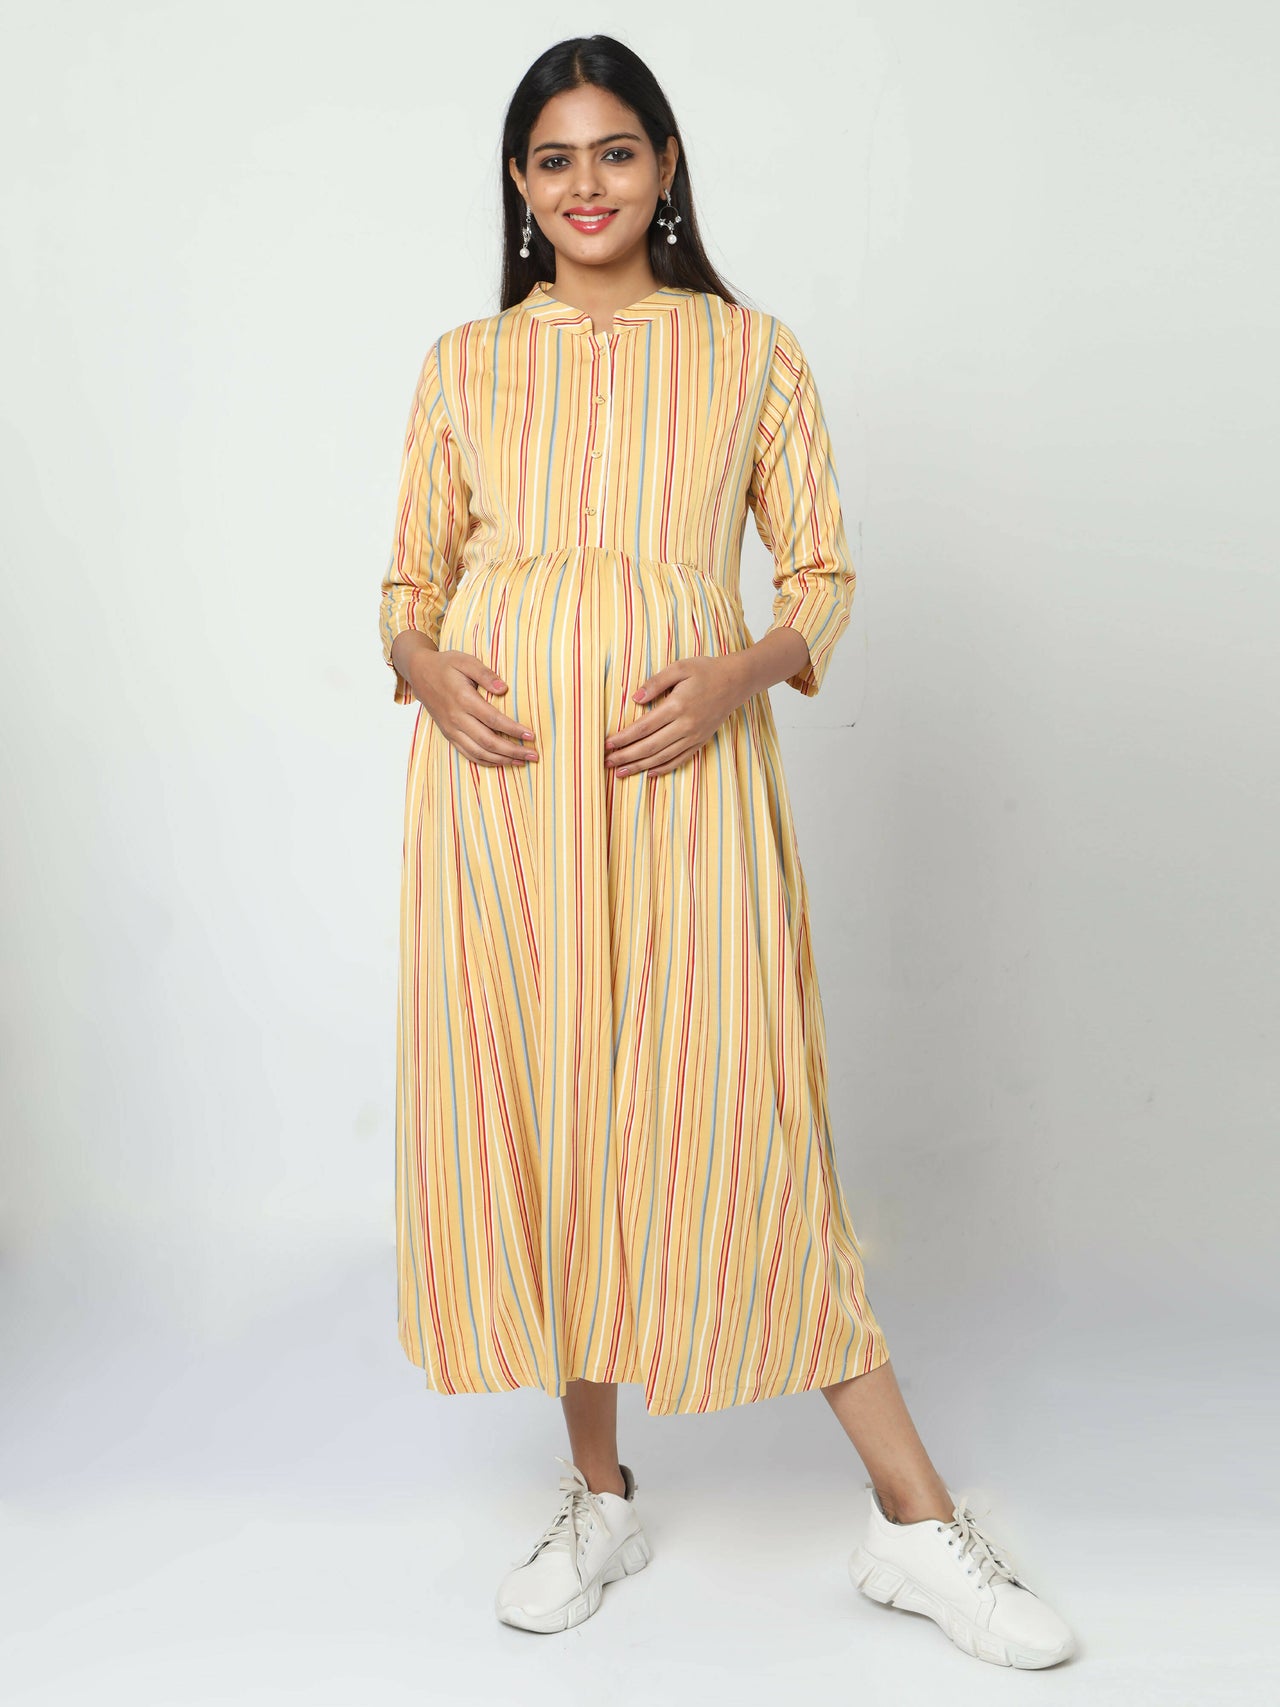 Manet Three Fourth Maternity Dress Striped With Concealed Zipper Nursing Access - Yellow - Distacart